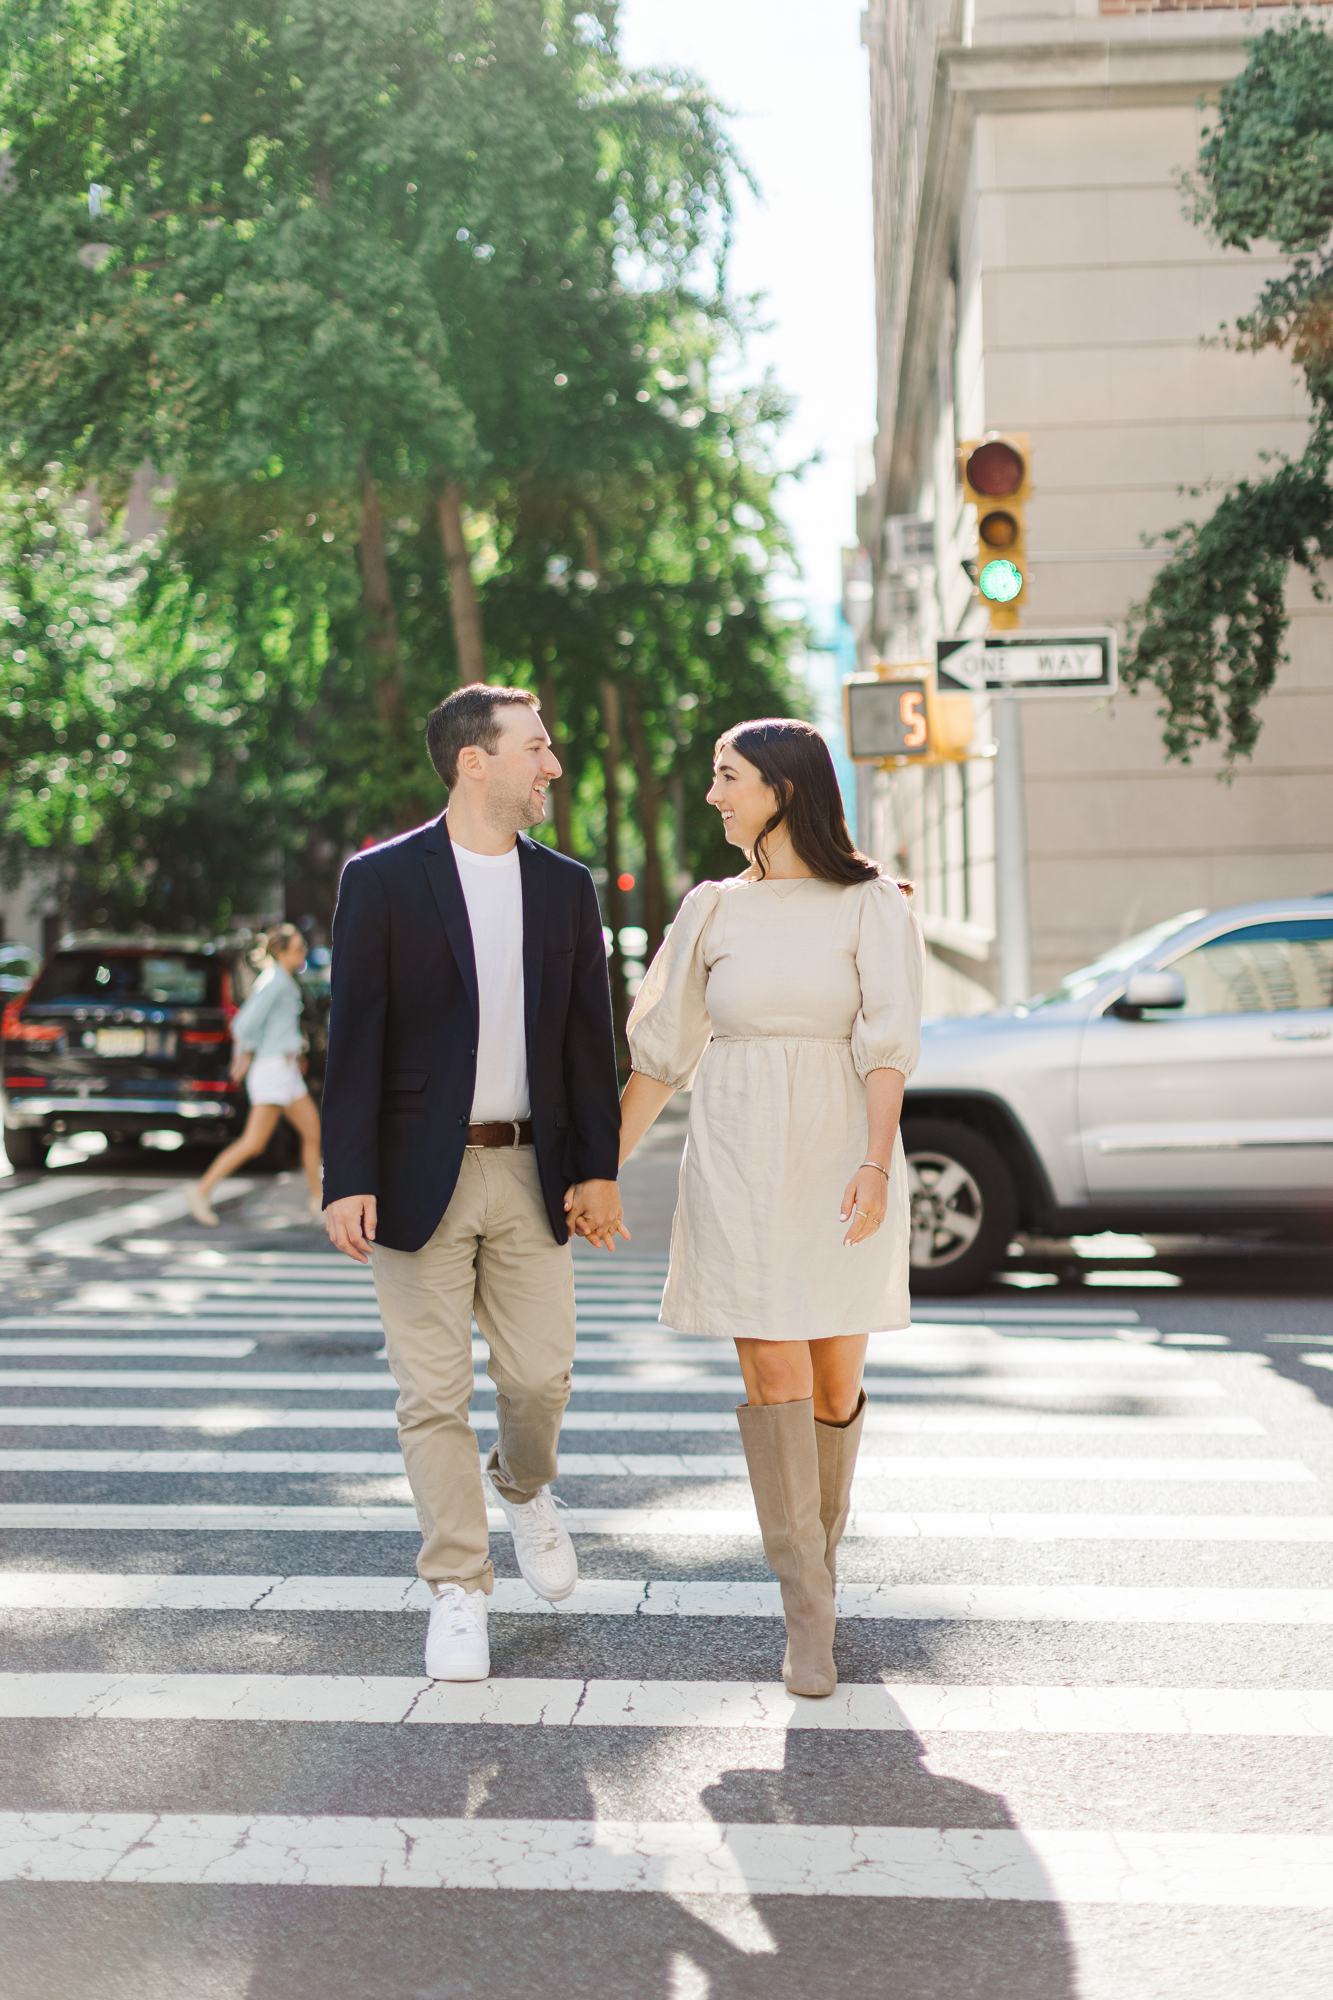 Awesome Engagement Photos In Upper East Side